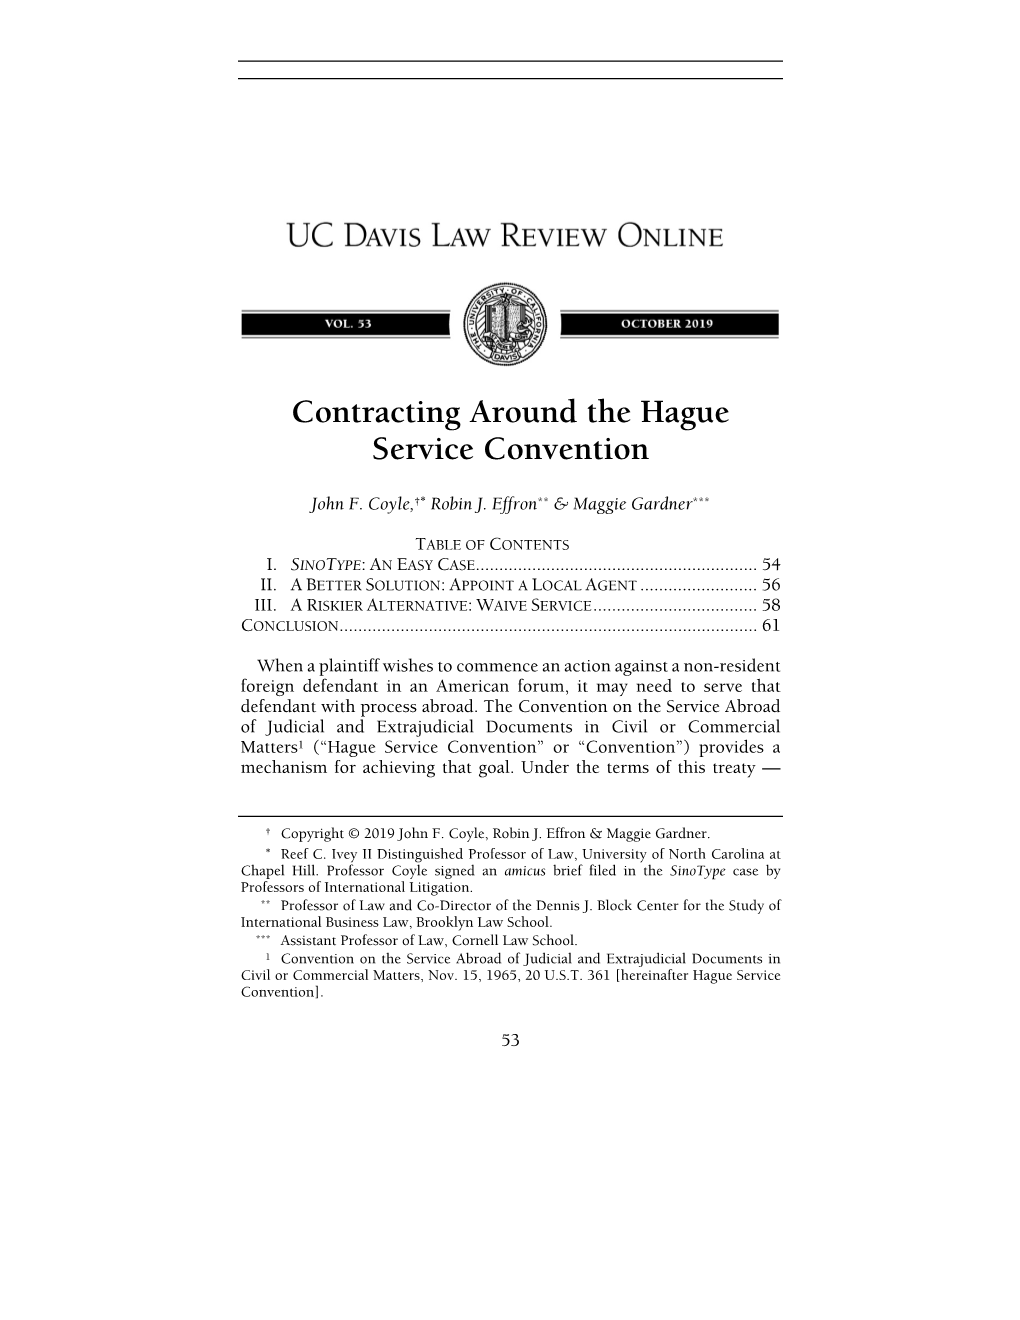 Contracting Around the Hague Service Convention